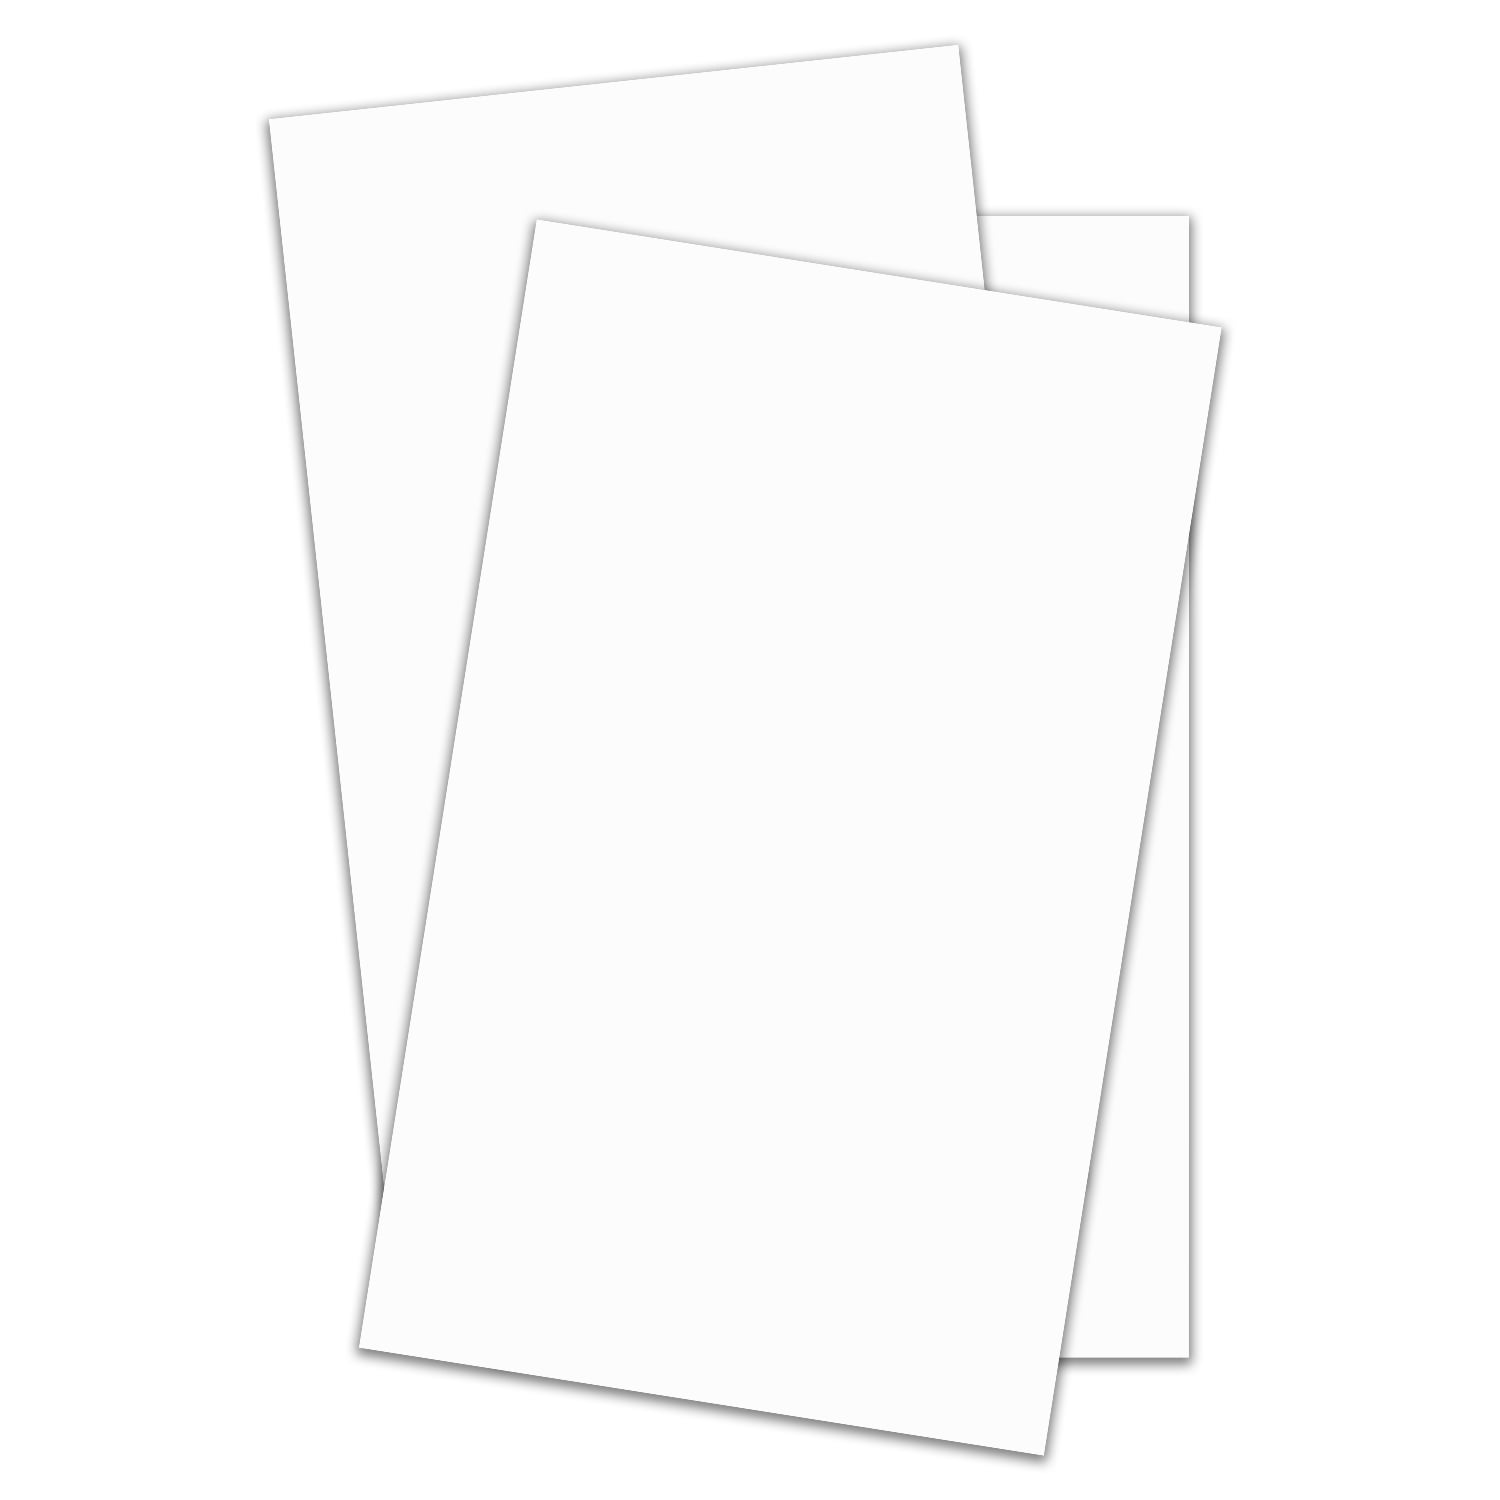 Cougar White 8-1/2-x-11 Cardstock Smooth Paper 2500-pk - 176 GSM (65lb Cover) PaperPapers Letter Size Card Stock Paper - Business, Card Making